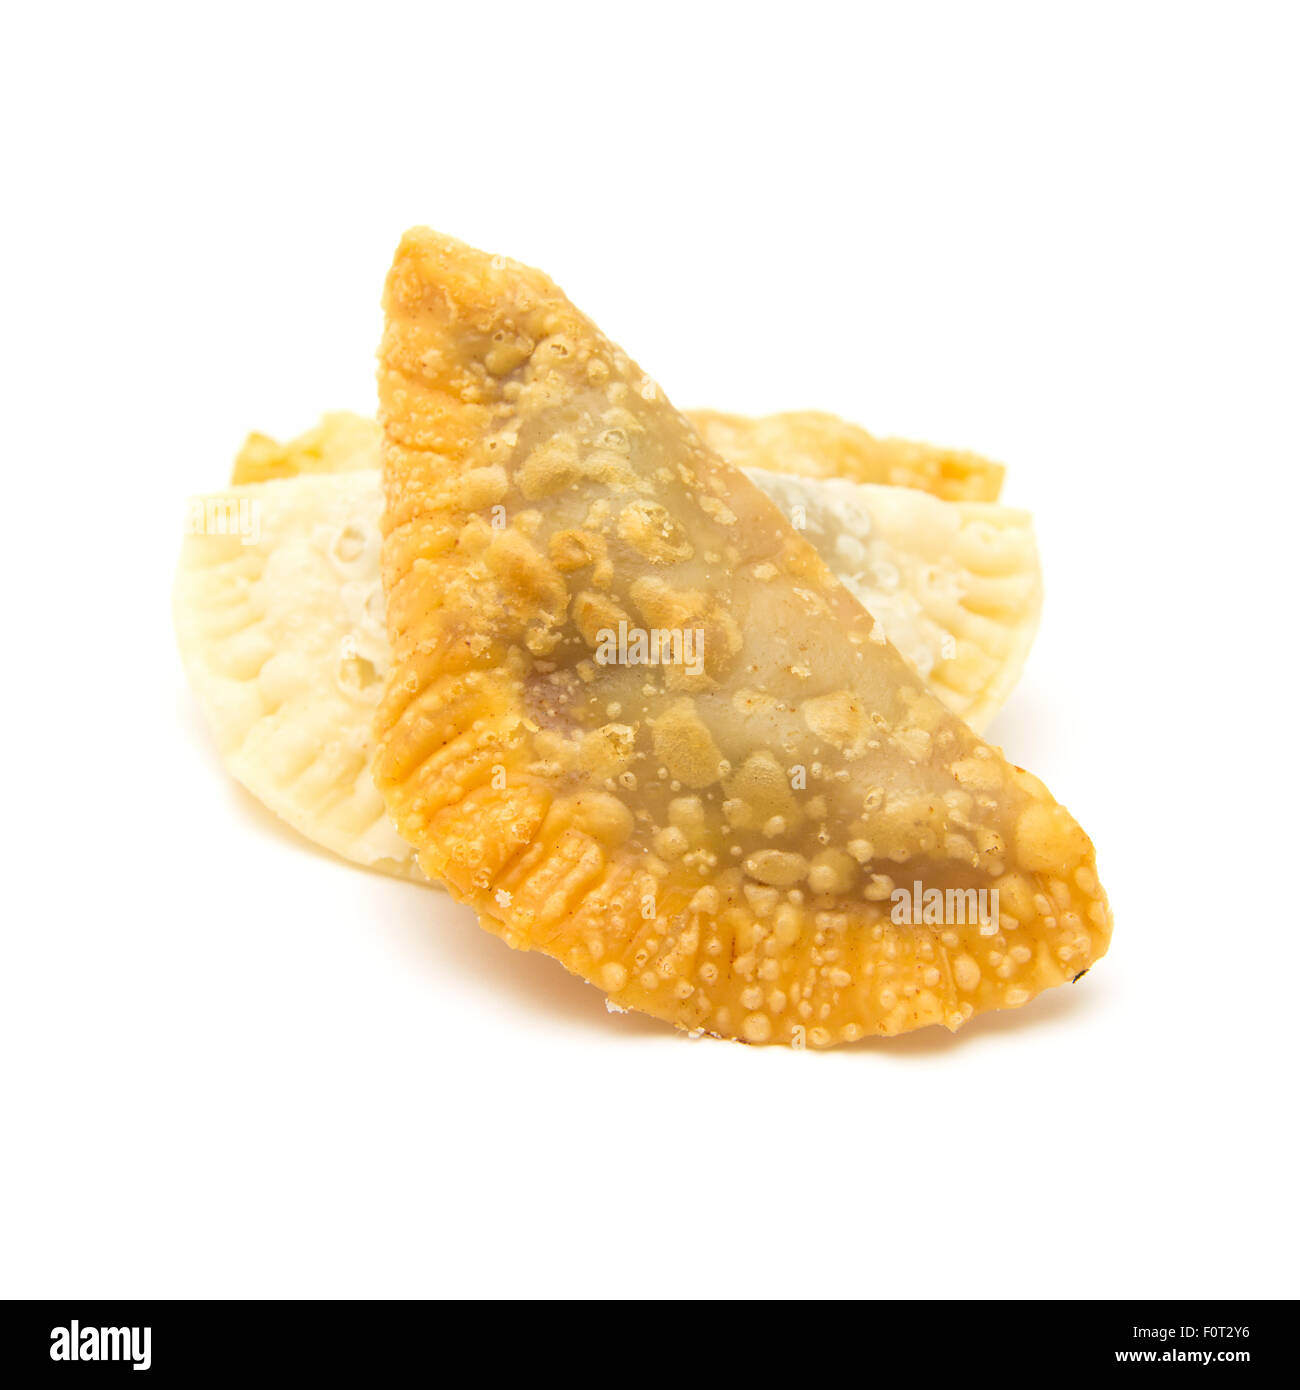 Canary islands sweets - truchas de fruta. Trucha is literally a trout, which refers to fish-like shape of the pastry, traditiona Stock Photo